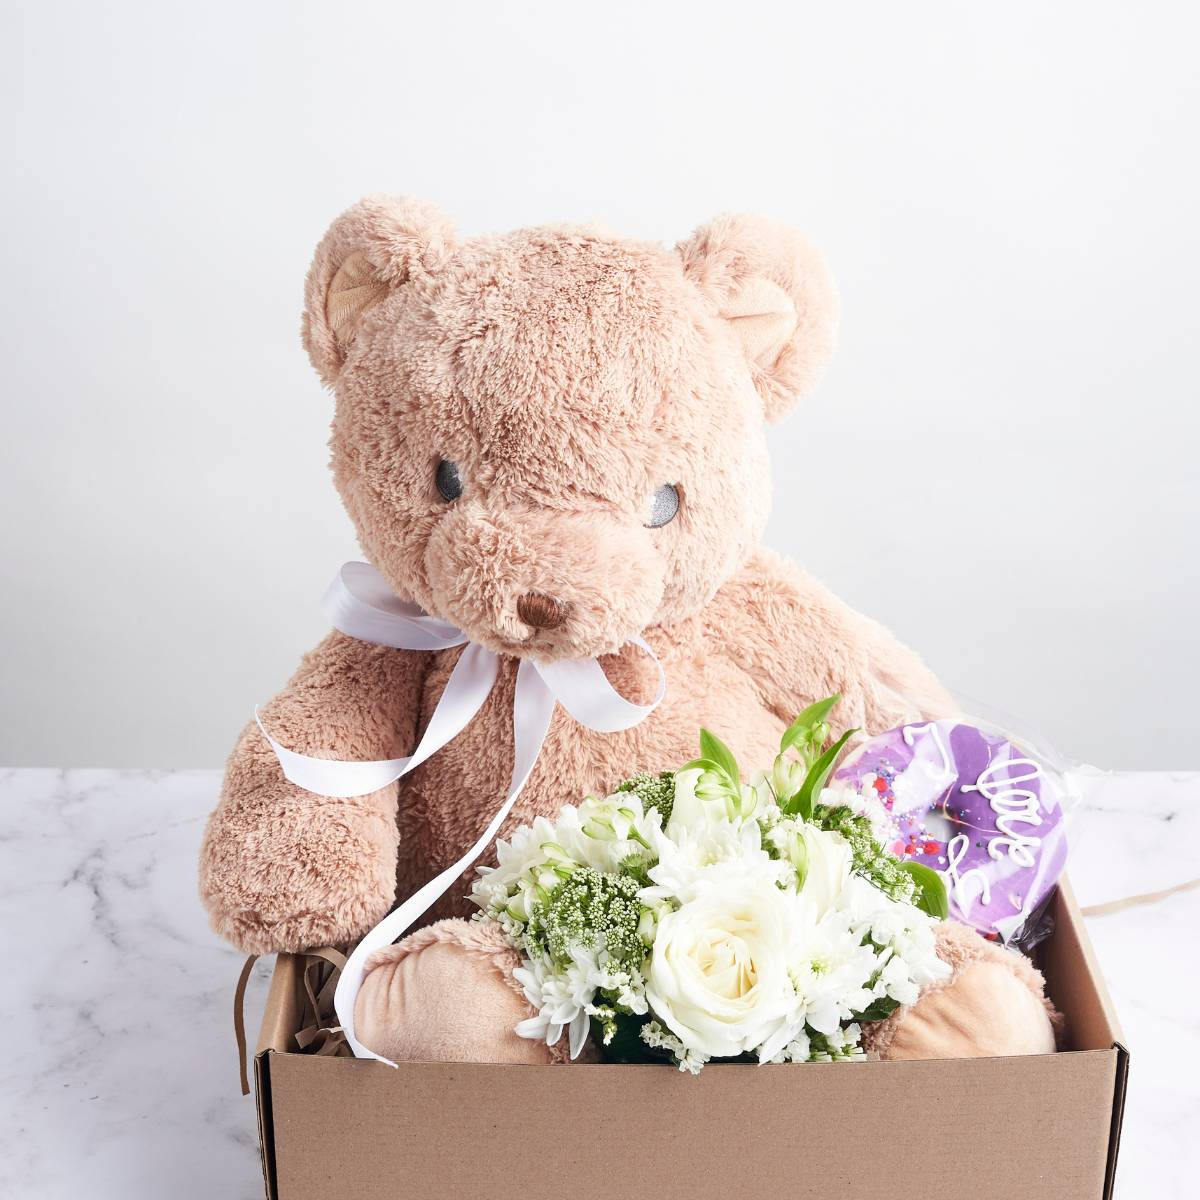 useful gift for gender neutral baby, gender reveal gift, teddy bear with doughnut and white flowers